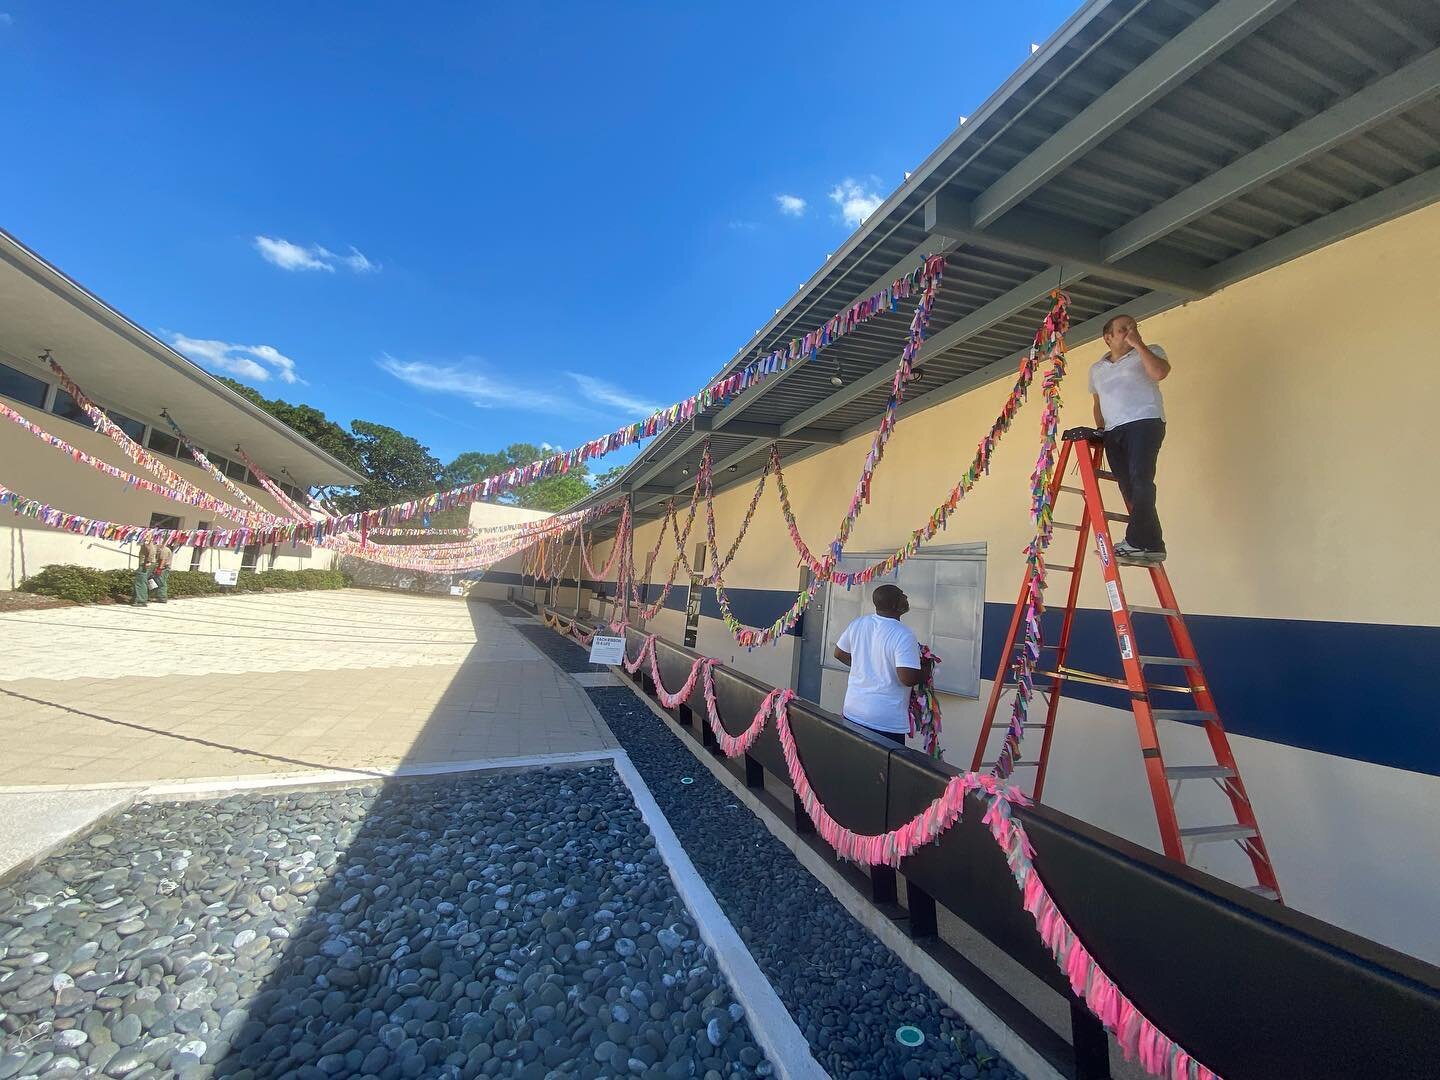 Installing 17,000 more ribbons for that many Covid deaths in Florida last 3 months. Event tonight @creativepinellas 6 pm, Largo, FL #covidribbonmemorial